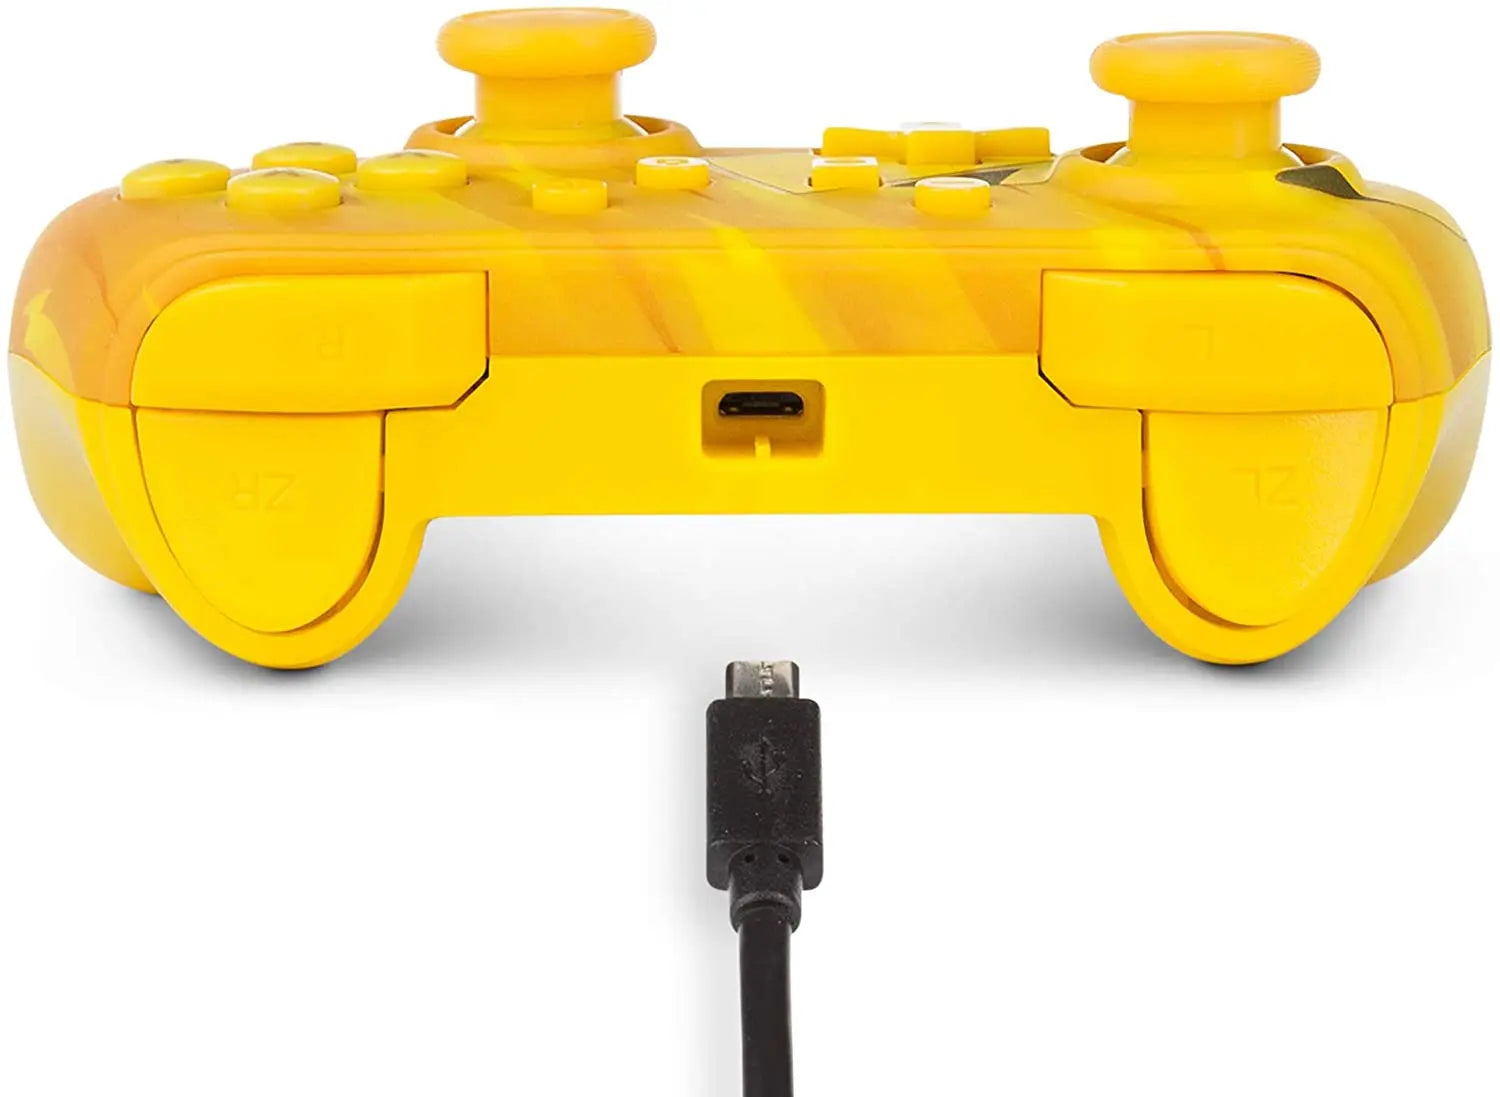 PowerA Pikachu Wired Controller for Switch - Yellow King Gaming